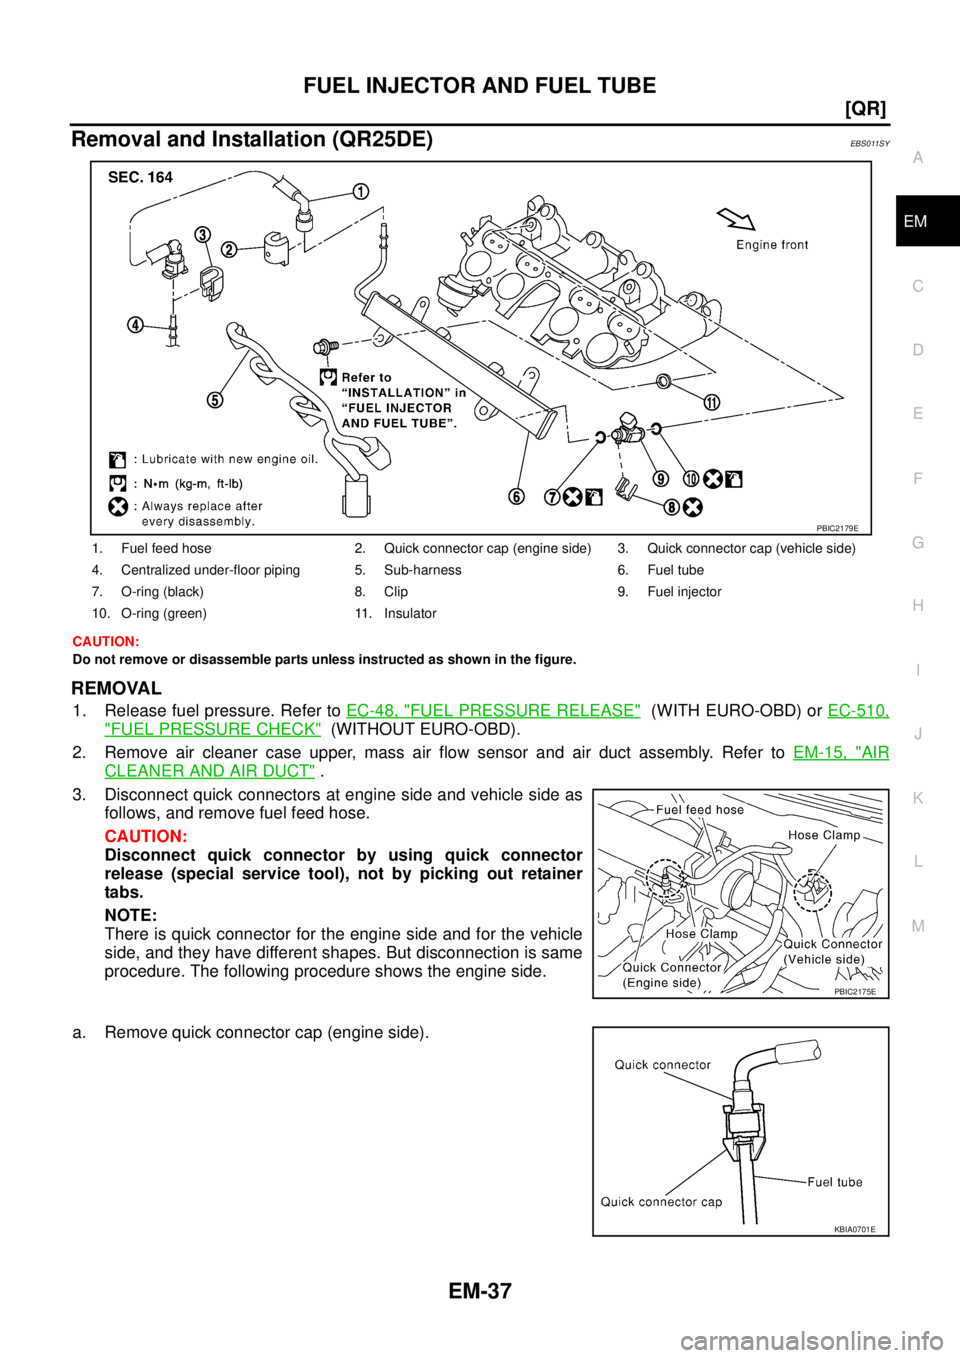 NISSAN X-TRAIL 2003  Service Repair Manual FUEL INJECTOR AND FUEL TUBE
EM-37
[QR]
C
D
E
F
G
H
I
J
K
L
MA
EM
 
Removal and Installation (QR25DE)EBS011SY
CAUTION:
Do not remove or disassemble parts unless instructed as shown in the figure.
REMOV